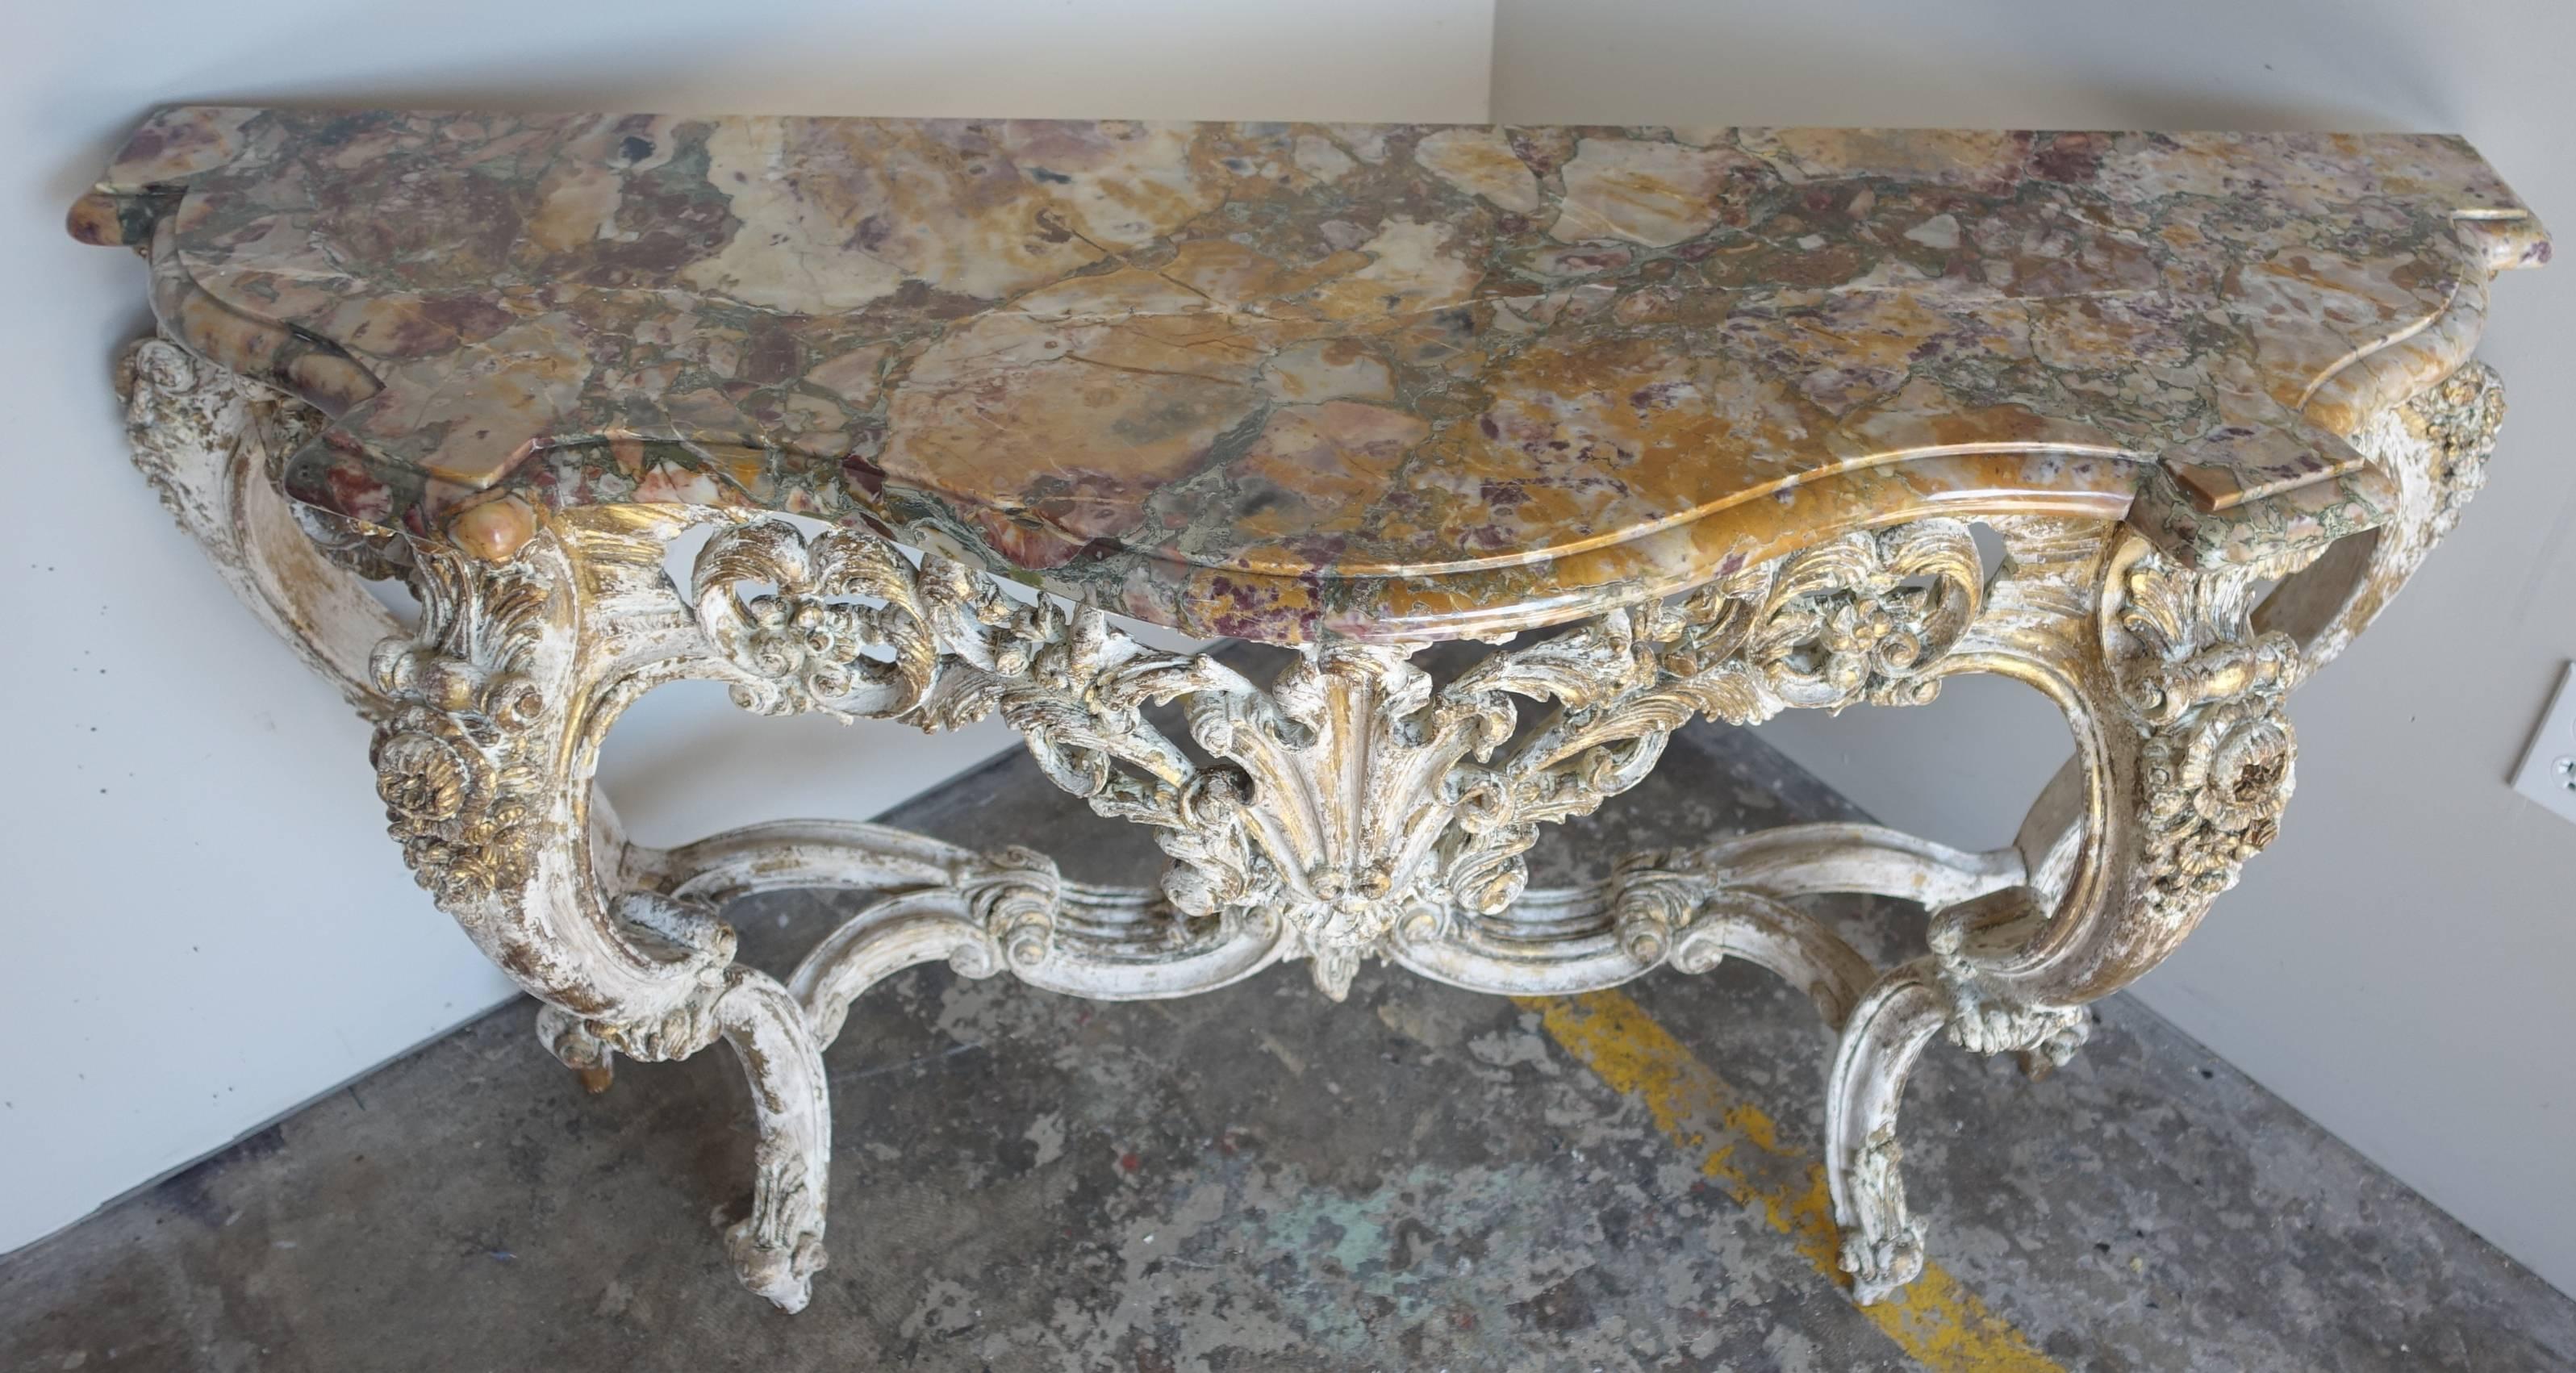 Pair of 19th century French Louis XV style painted and parcel gilt consoles with a carved shell, acanthus leaves, and roses throughout. Original marble tops.